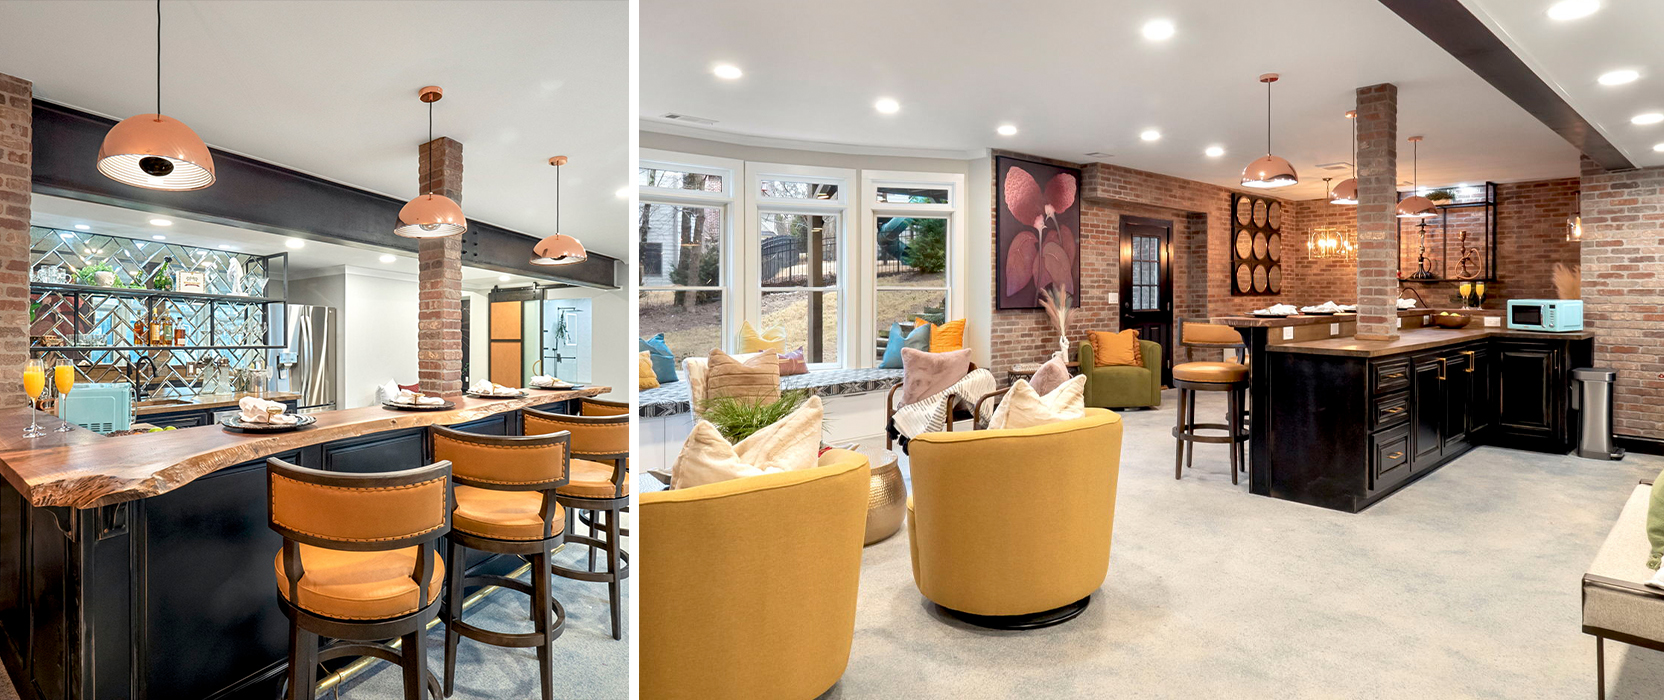 Finished basement with live-edge wood-topped bar, copper pendant lighting, rounded yellow swivel chairs, exposed brick walls and bay window with bench seat.